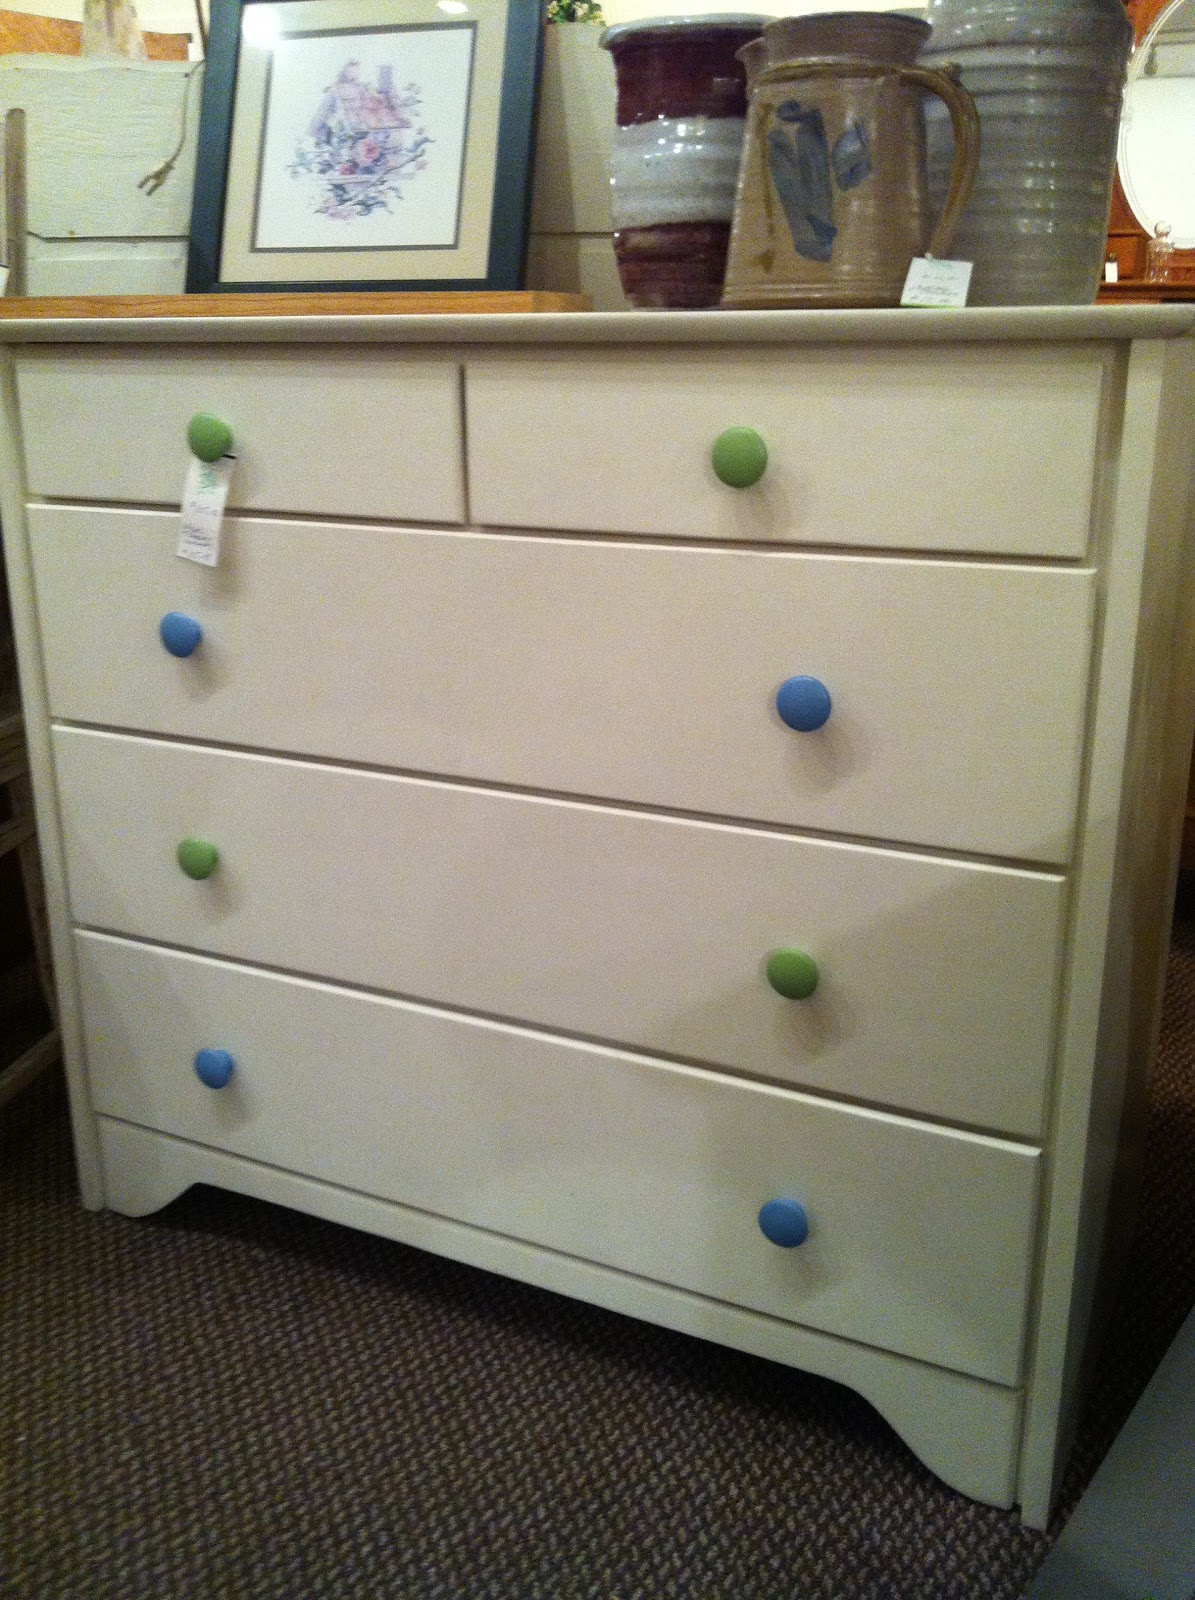 Simple contrasting drawer knobs